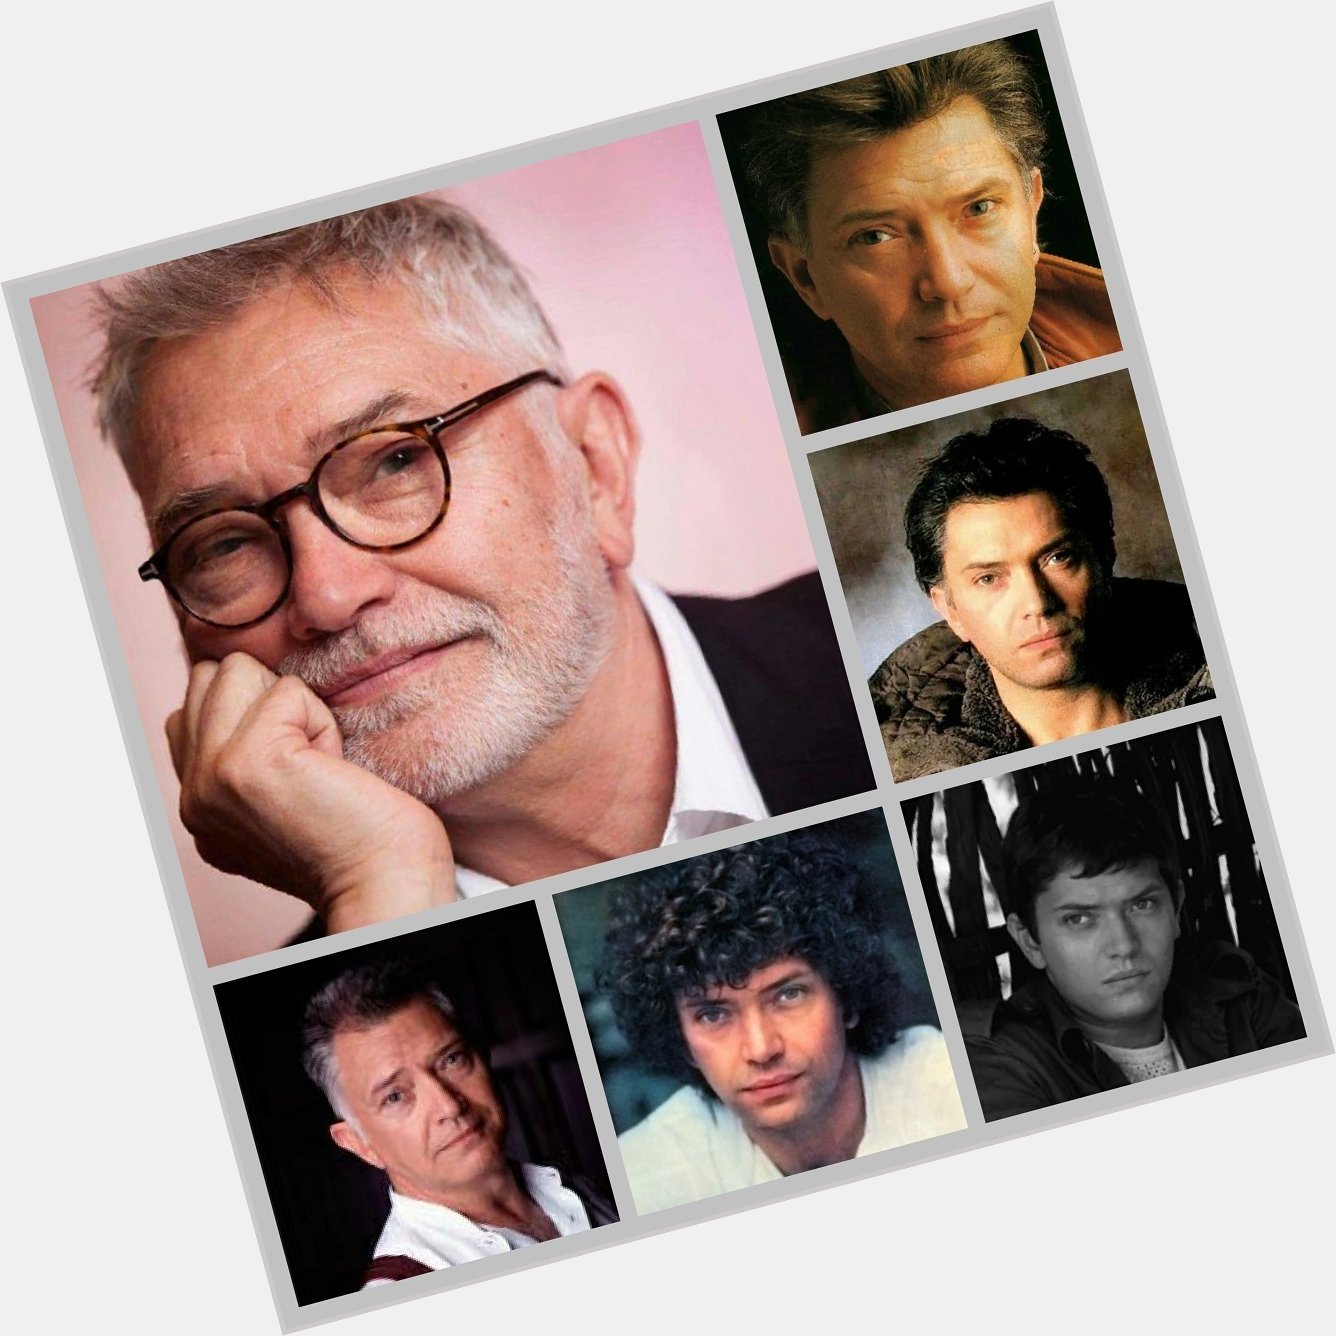 Wishing a very happy birthday to the ever youthful Martin Shaw 